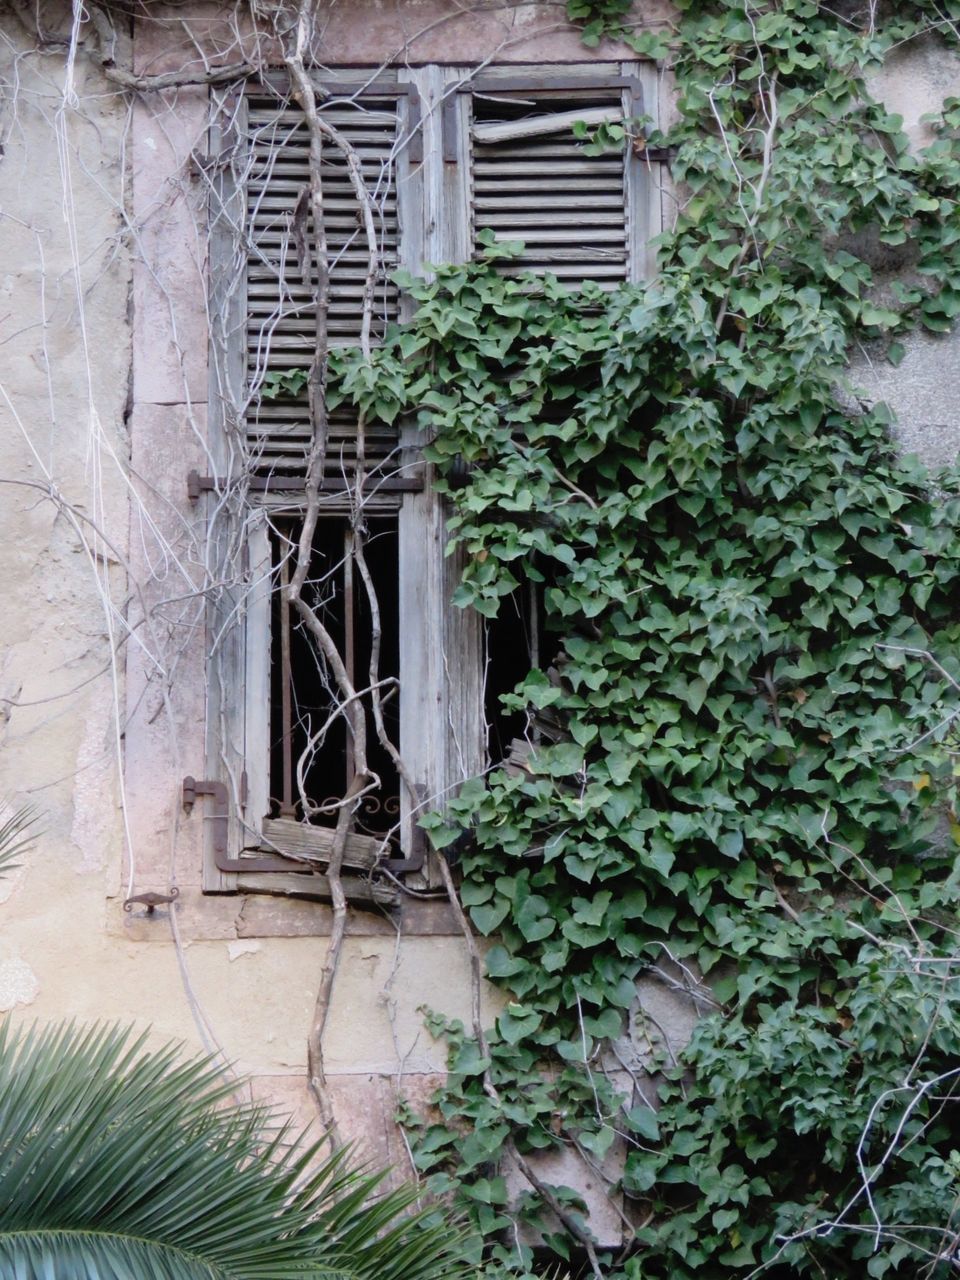 plant, built structure, architecture, growth, house, building exterior, ivy, leaf, wood - material, green color, window, door, wall - building feature, closed, old, outdoors, wall, day, abandoned, front or back yard